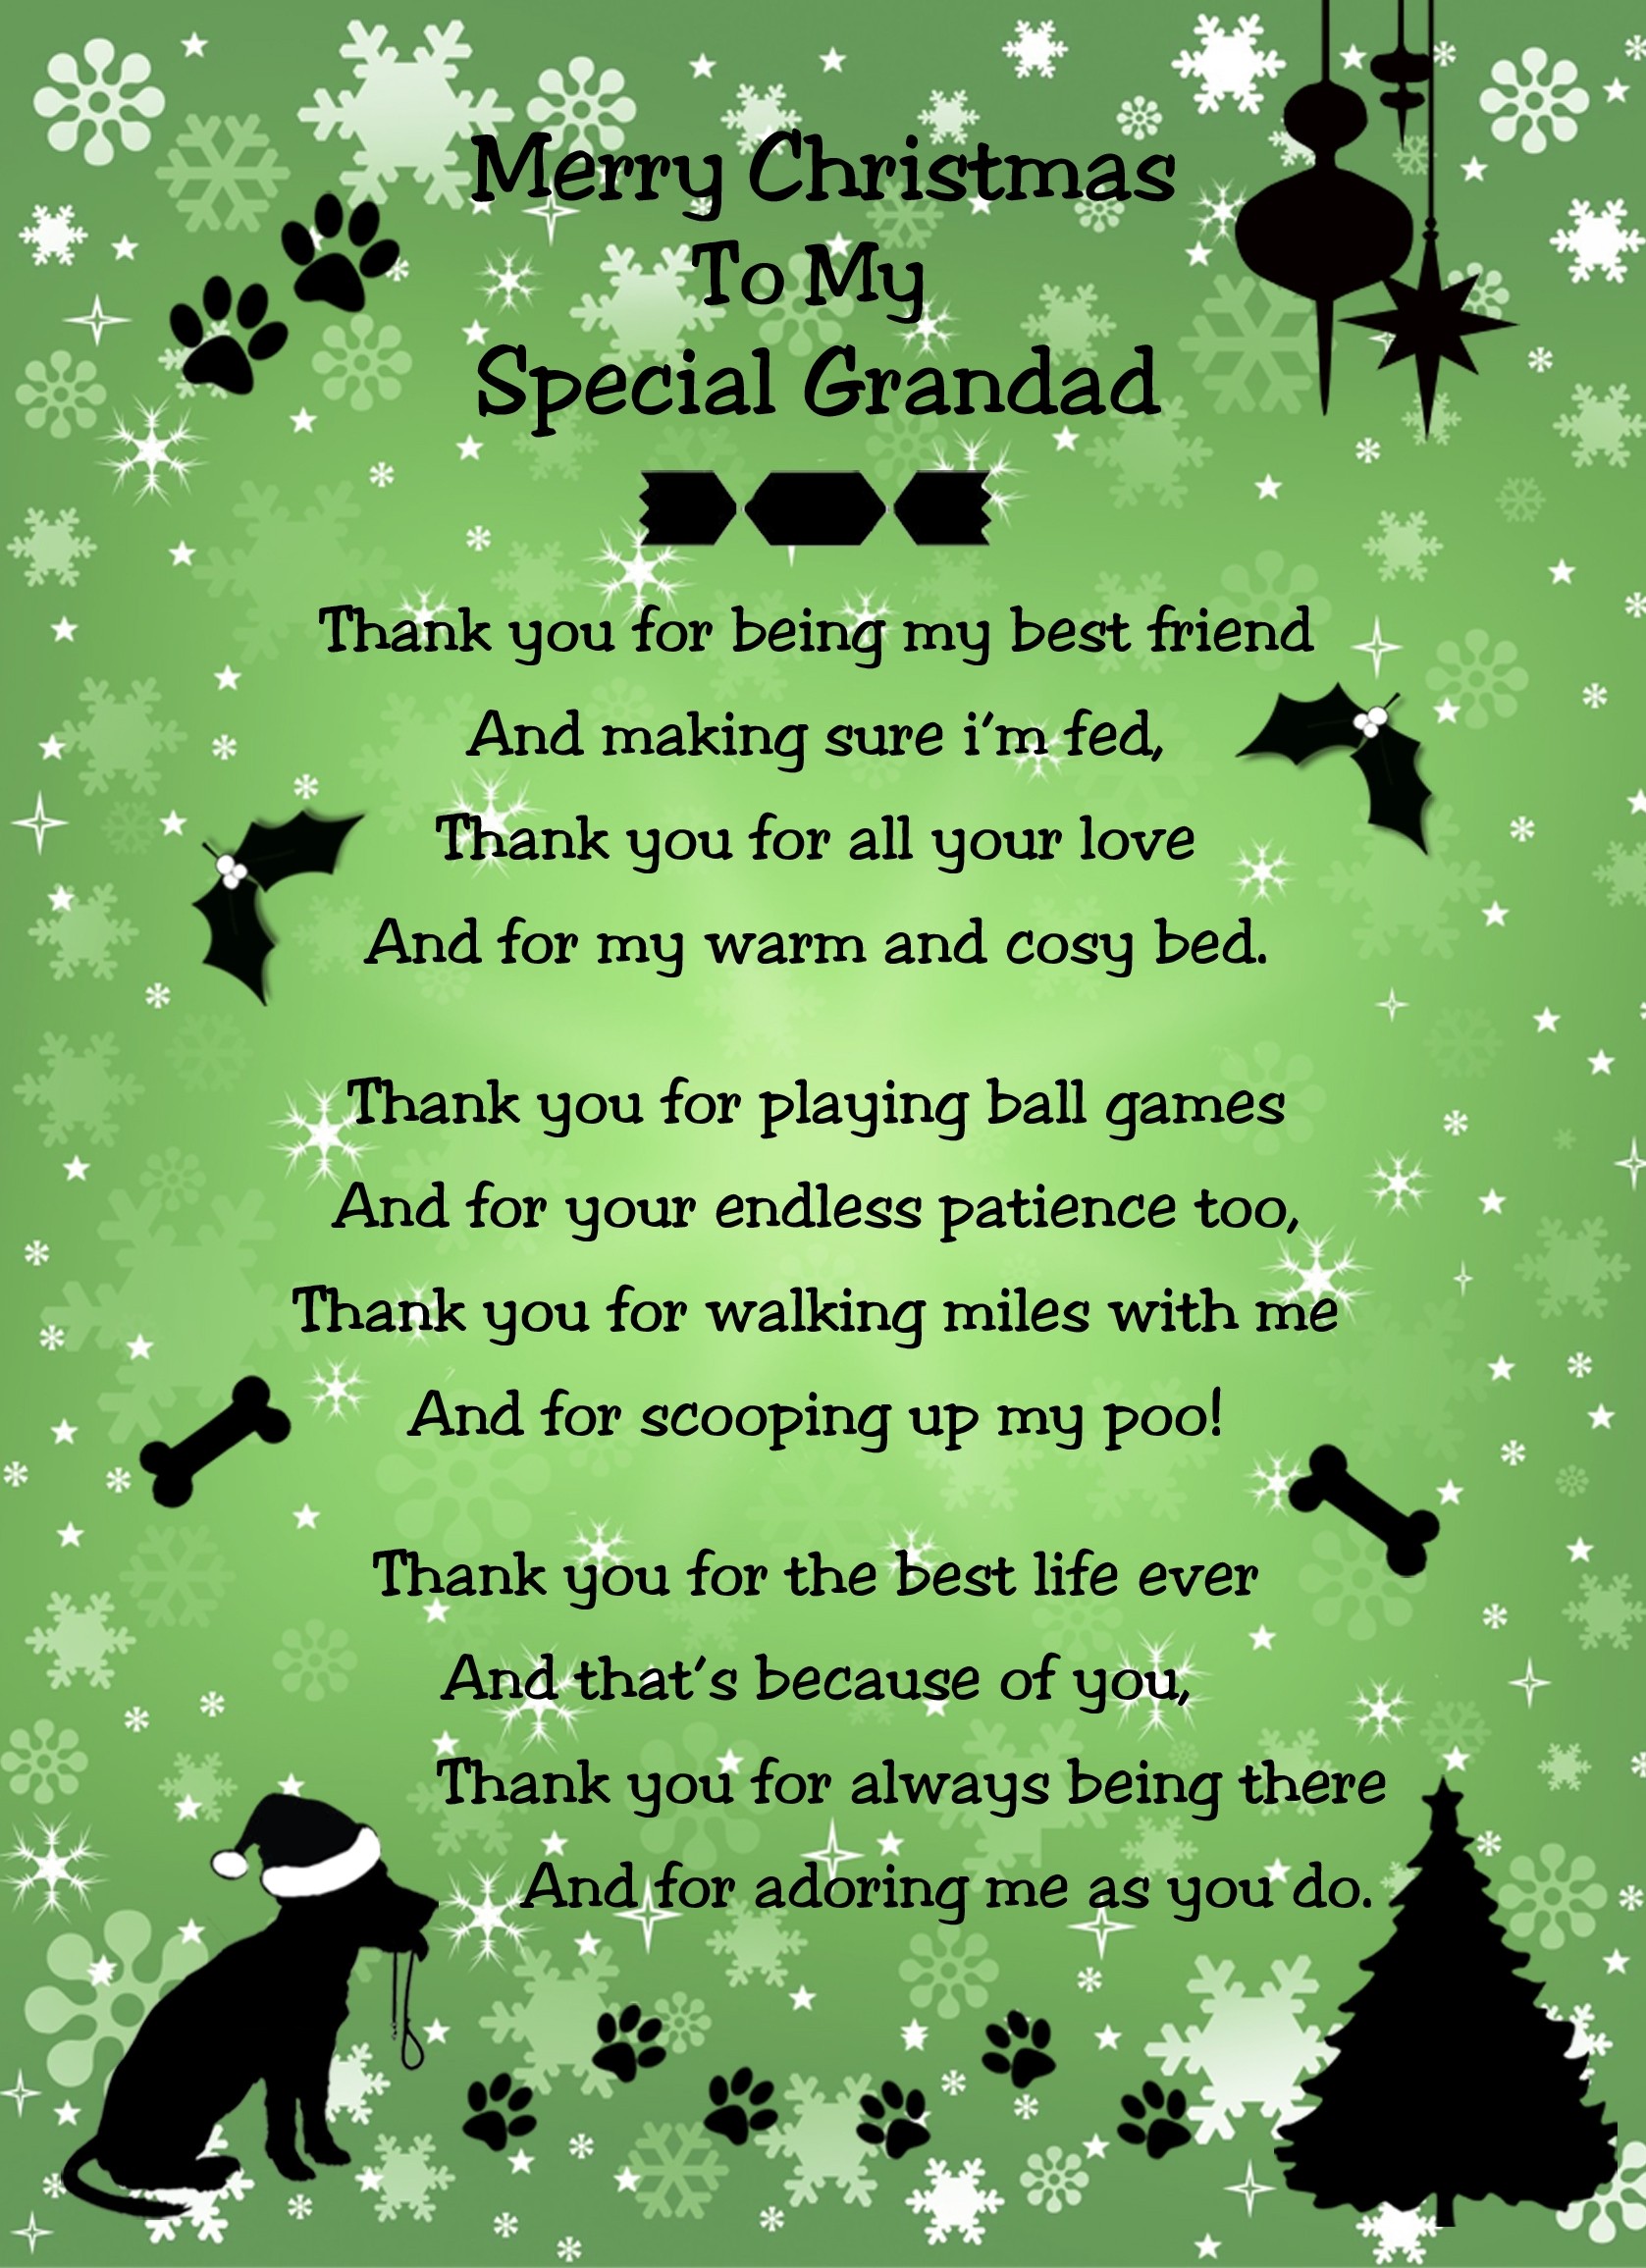 From The Dog Verse Poem Christmas Card (Special Grandad, Green, Merry Christmas)